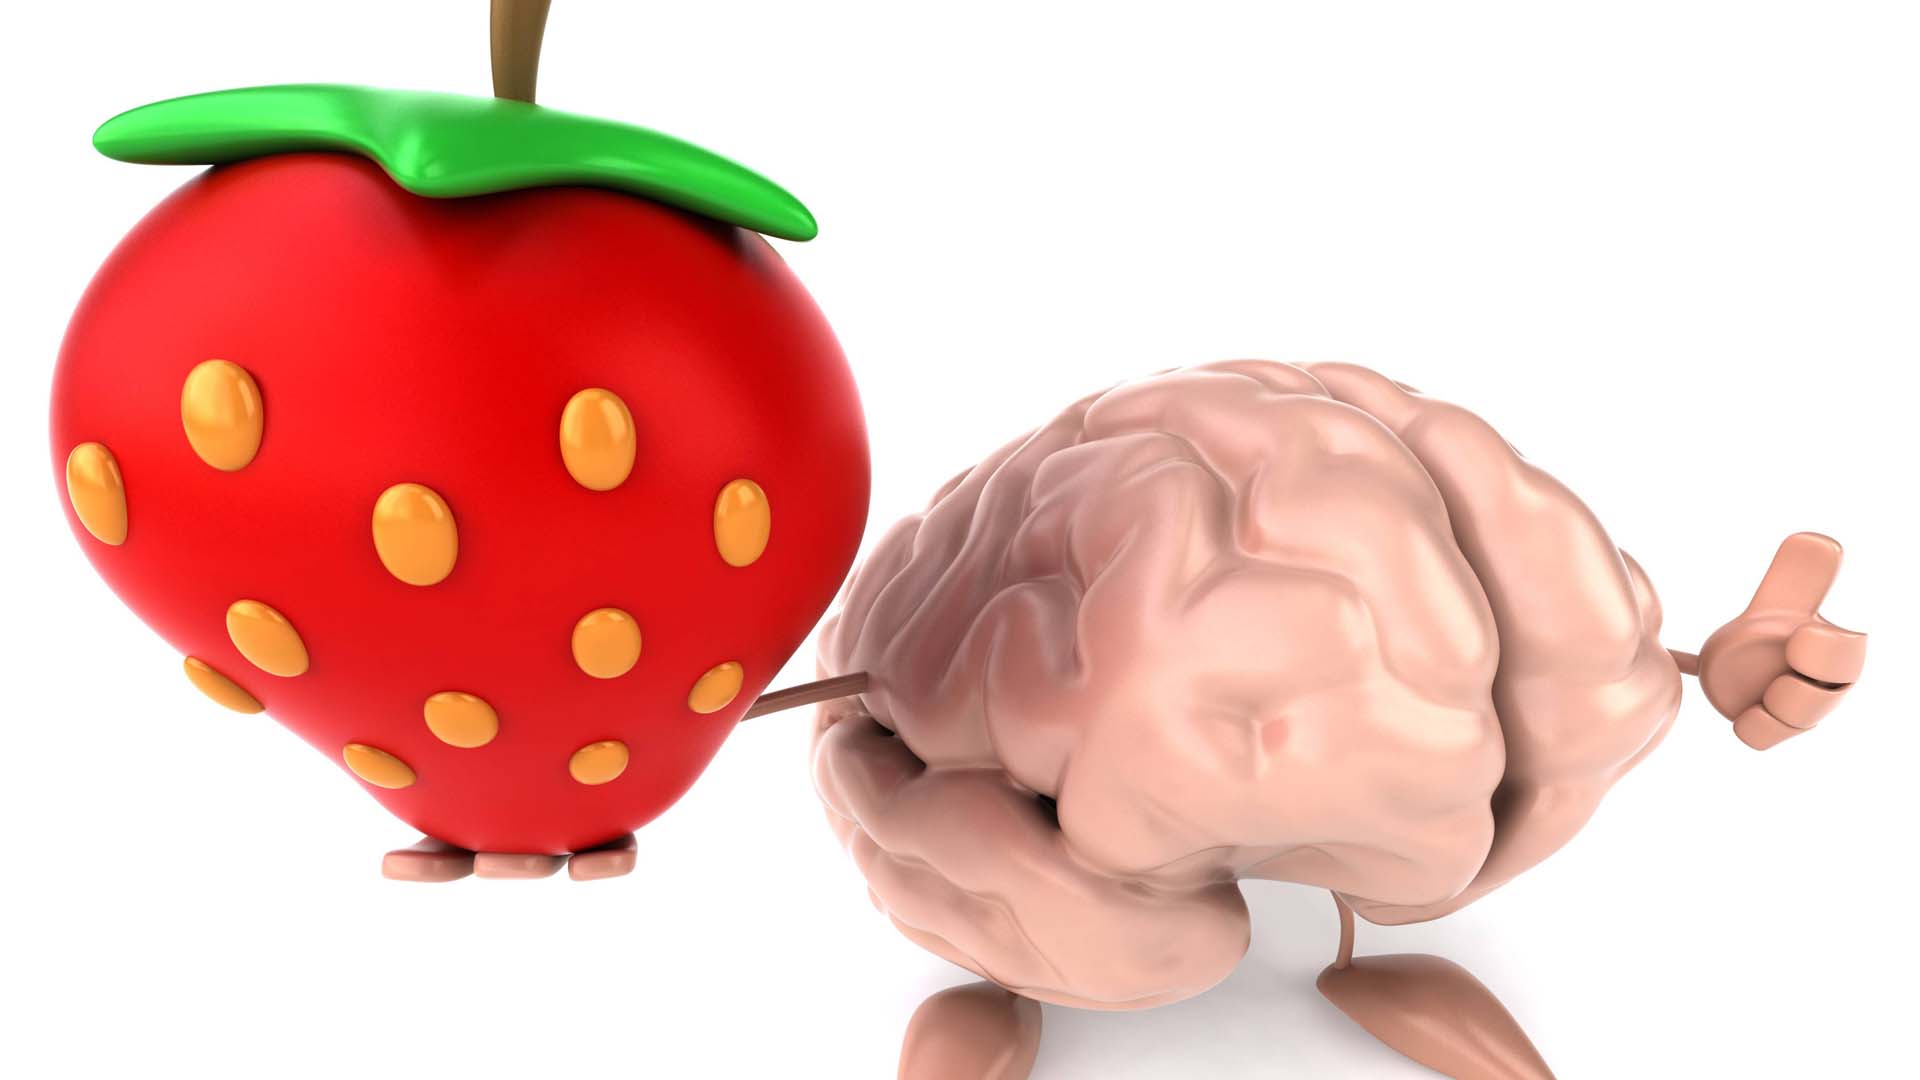 An illustration of a brain with hands and feet holding a strawberry.